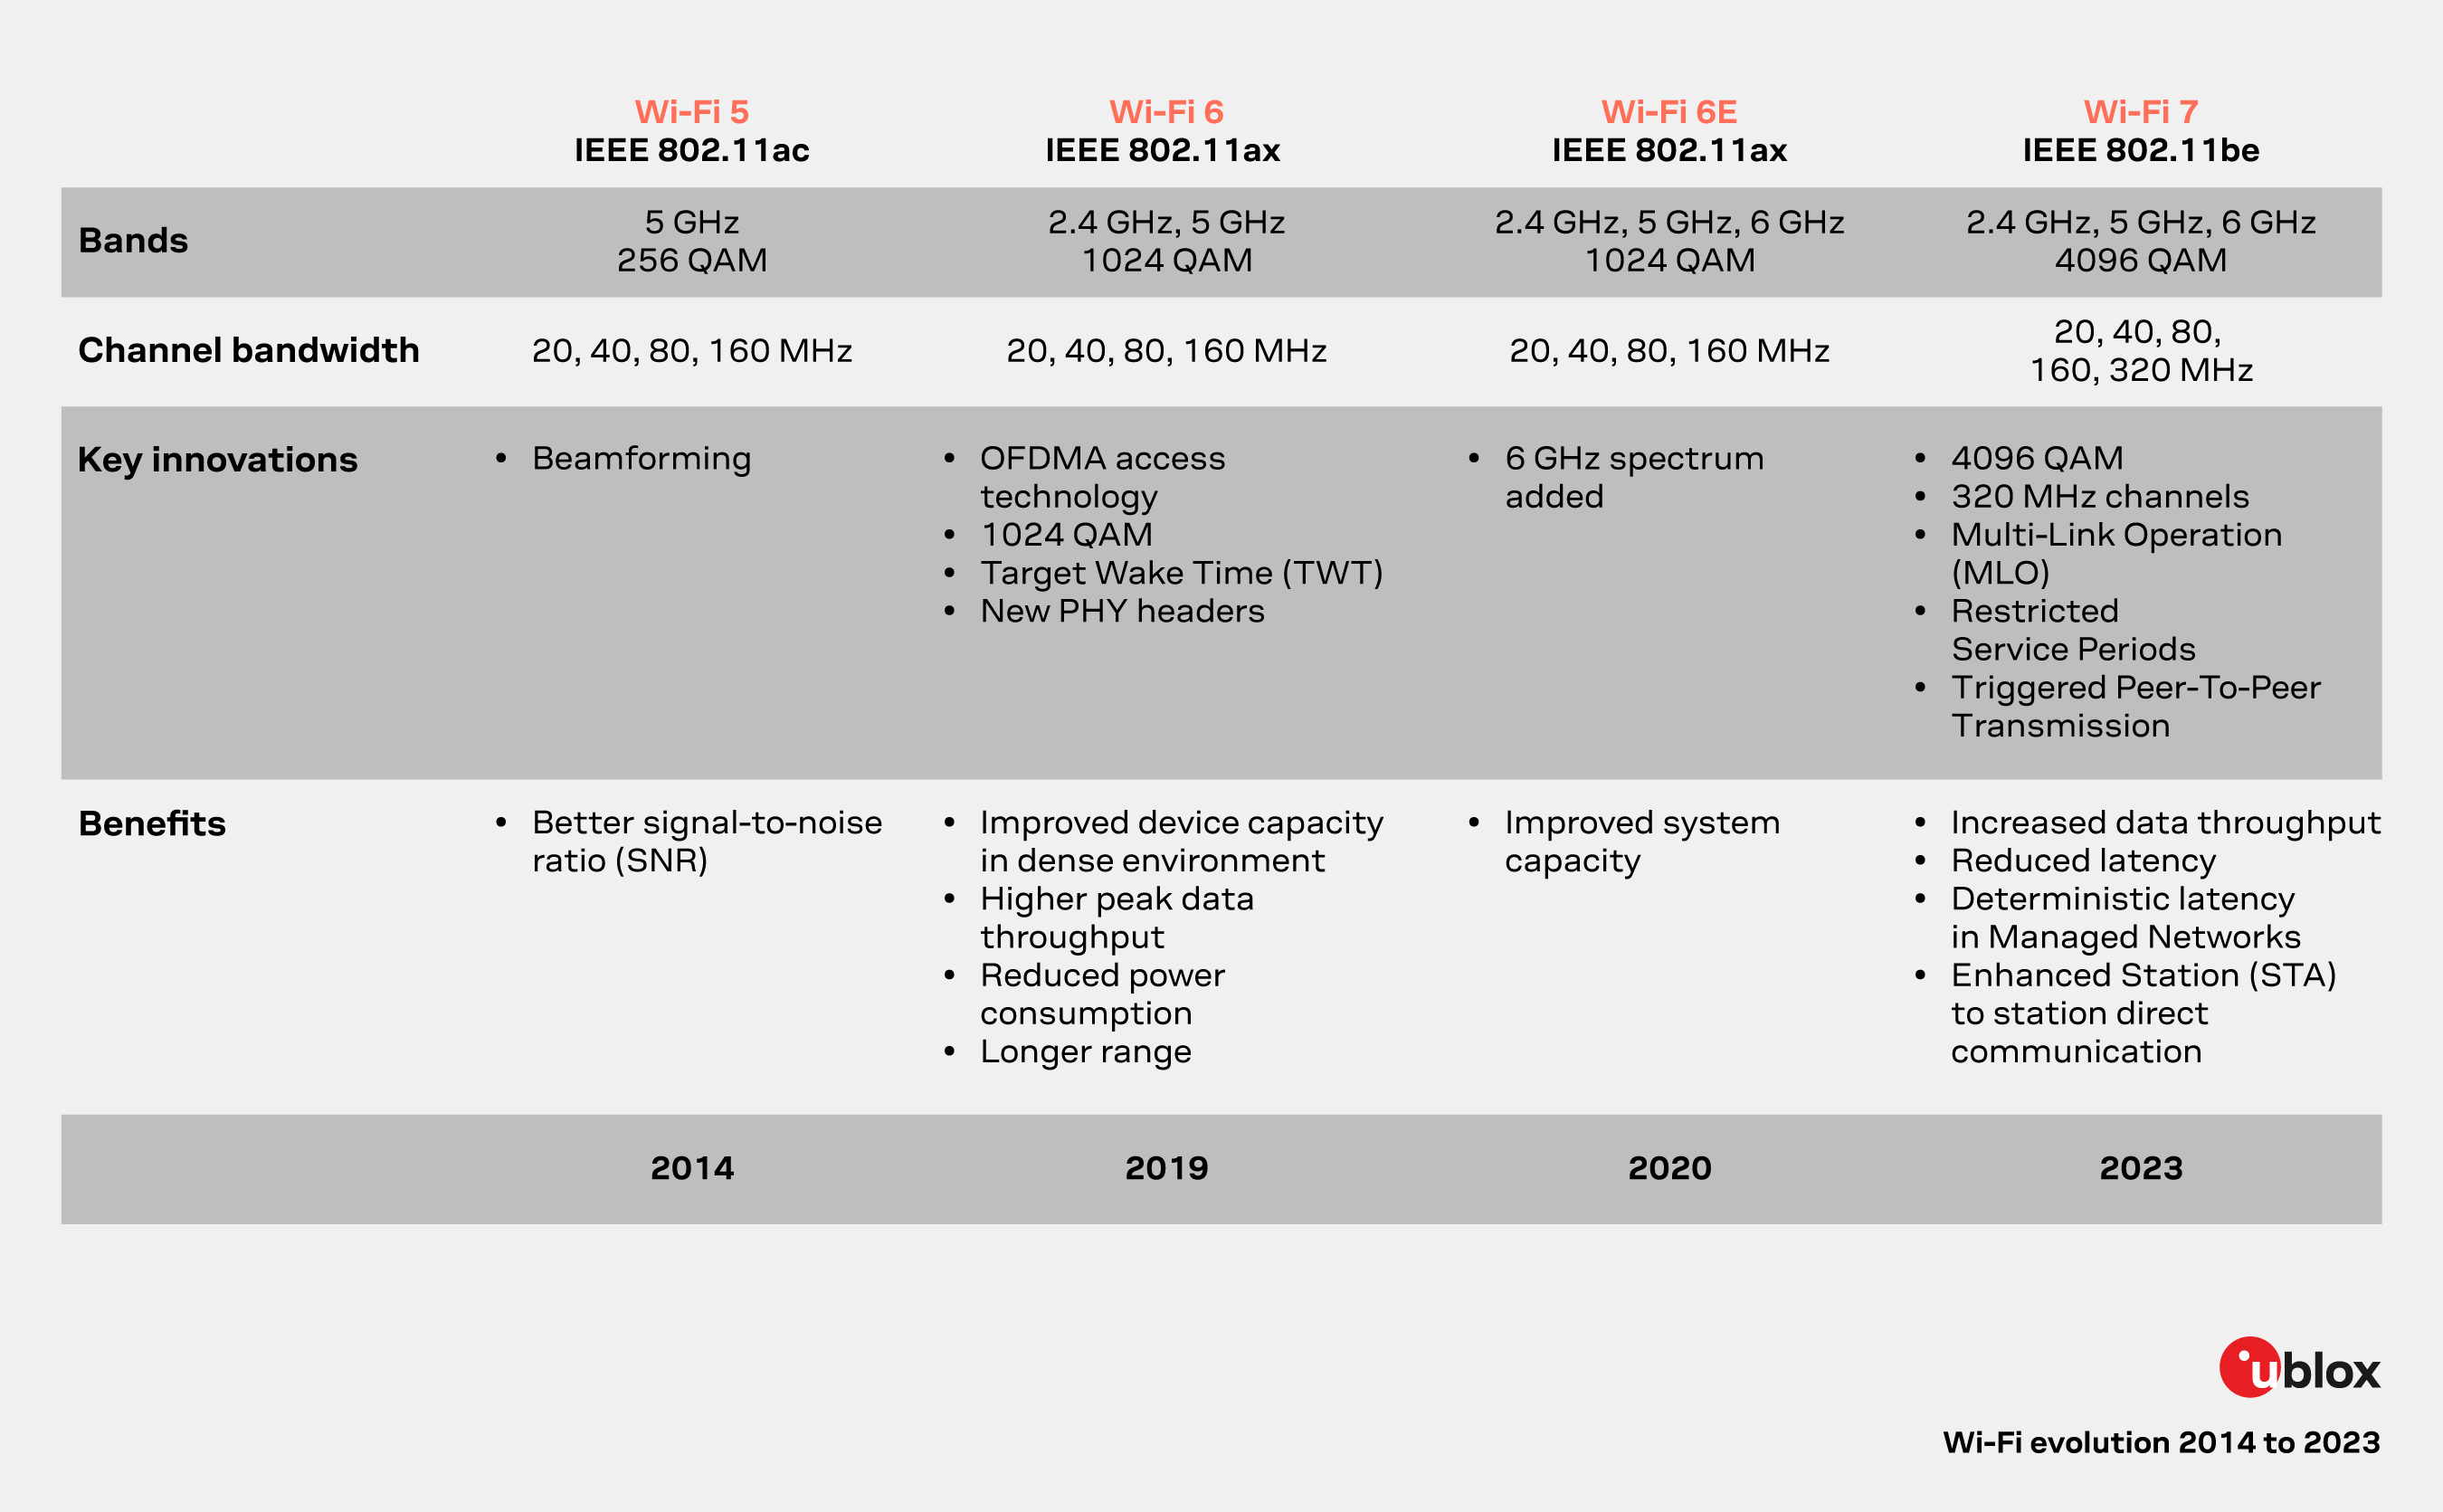 table presenting Wi-Fi evolution from 2014 to 2023